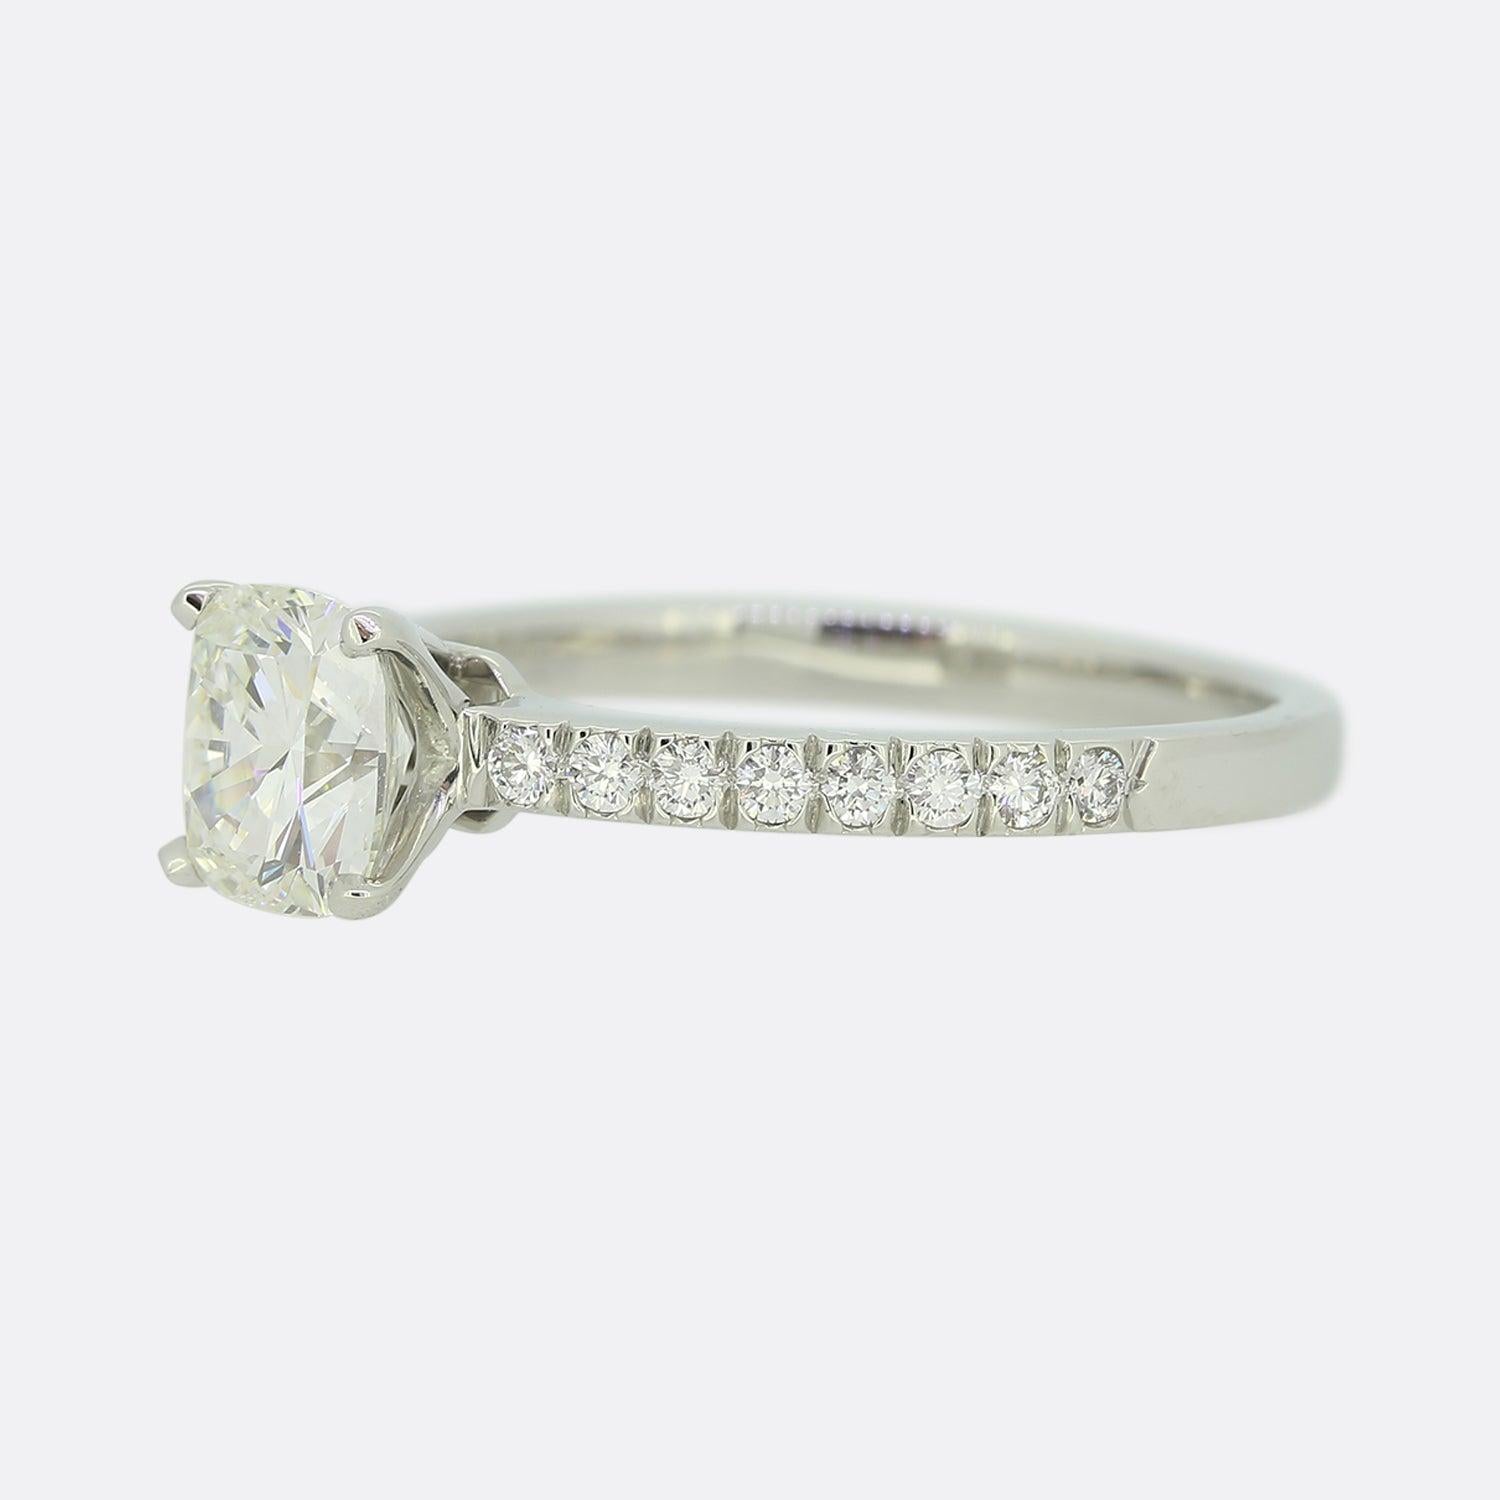 This is a wonderful Tiffany & Co. platinum solitaire engagement ring. The centre stone is a 1.10 carat cushion cut diamond set in the iconic Tiffany four clawed mount.

Condition: Used (Very Good)
Weight: 4.2 grams
Ring Size: N
Centre Diamond